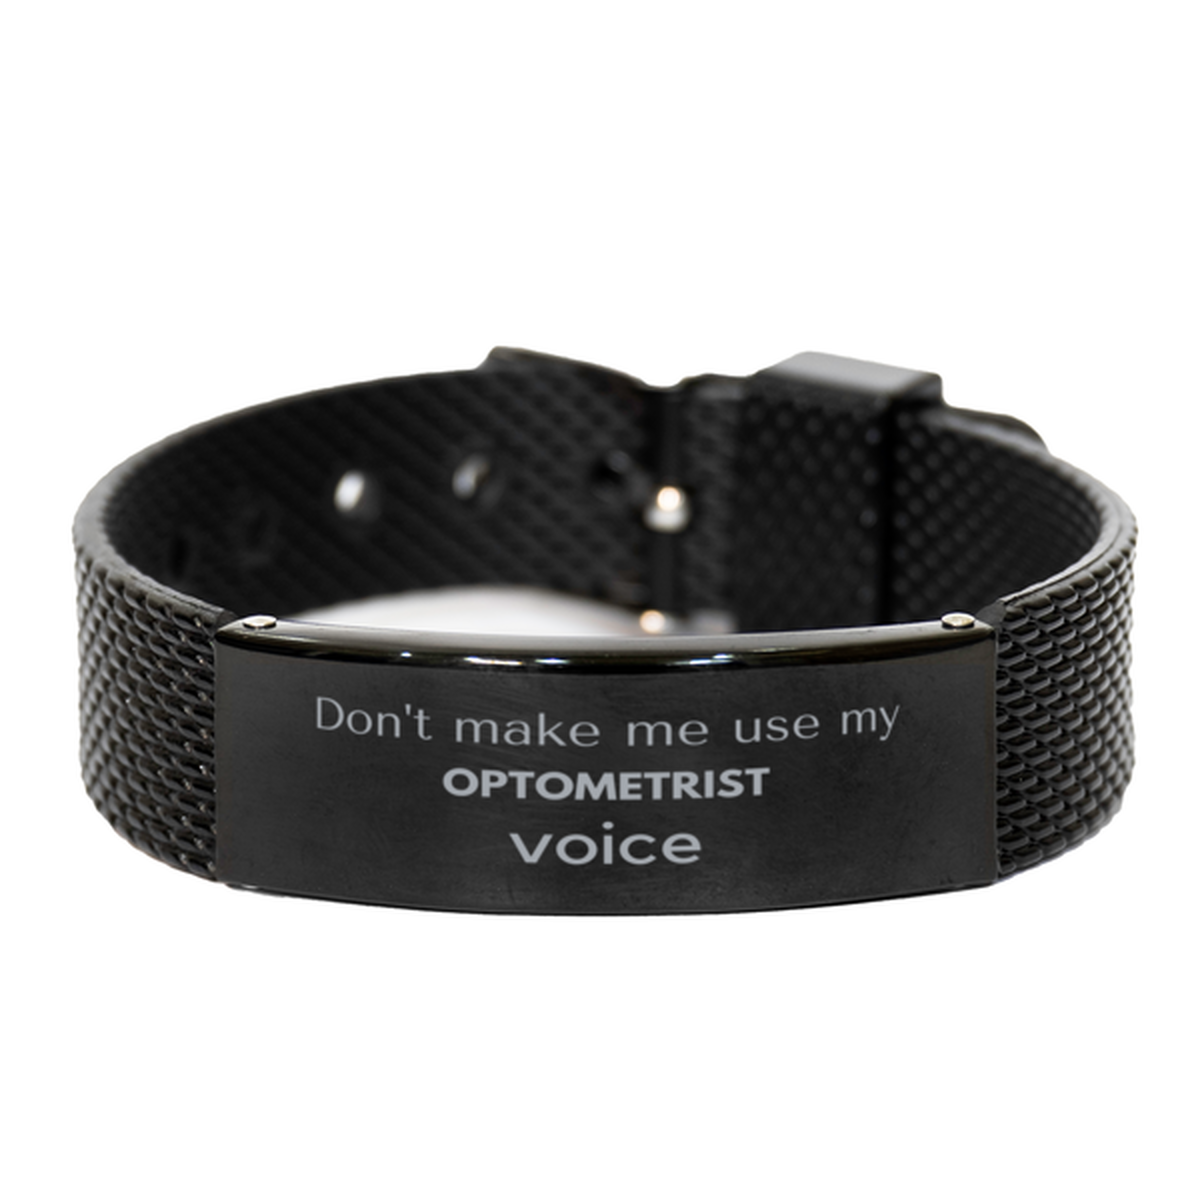 Don't make me use my Optometrist voice, Sarcasm Optometrist Gifts, Christmas Optometrist Black Shark Mesh Bracelet Birthday Unique Gifts For Optometrist Coworkers, Men, Women, Colleague, Friends